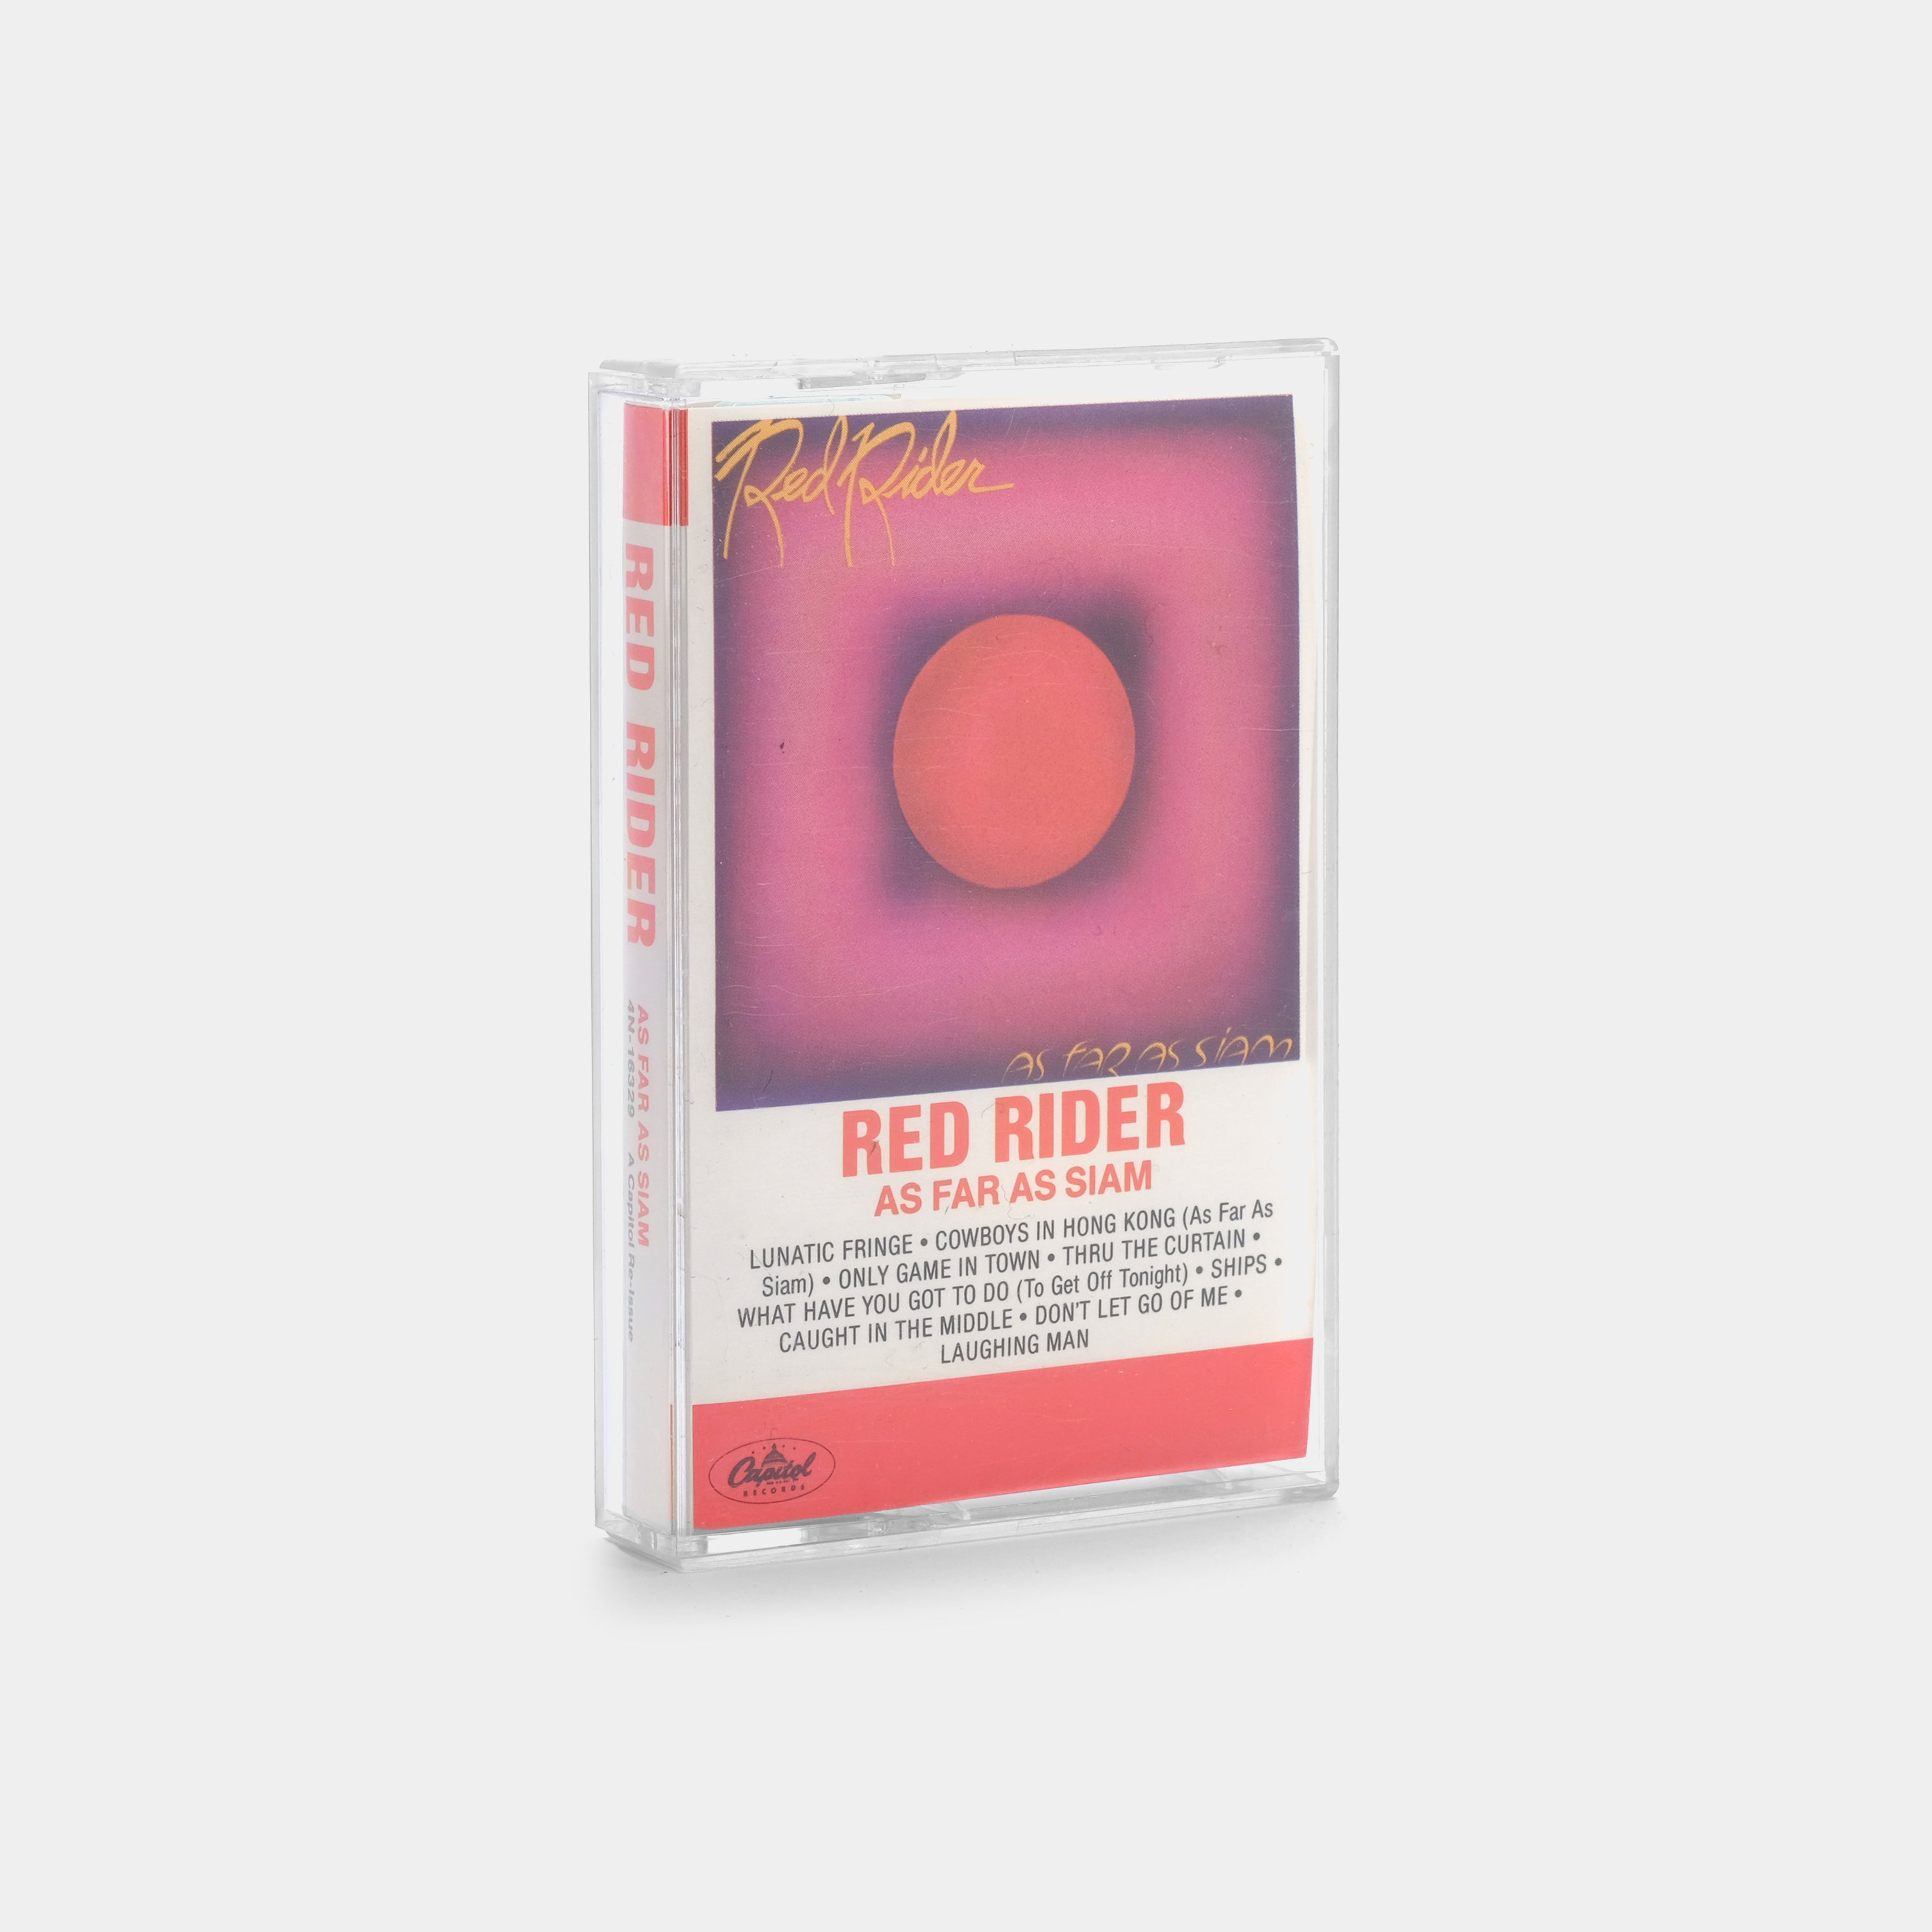 Red Rider - As Far As Siam Cassette Tape